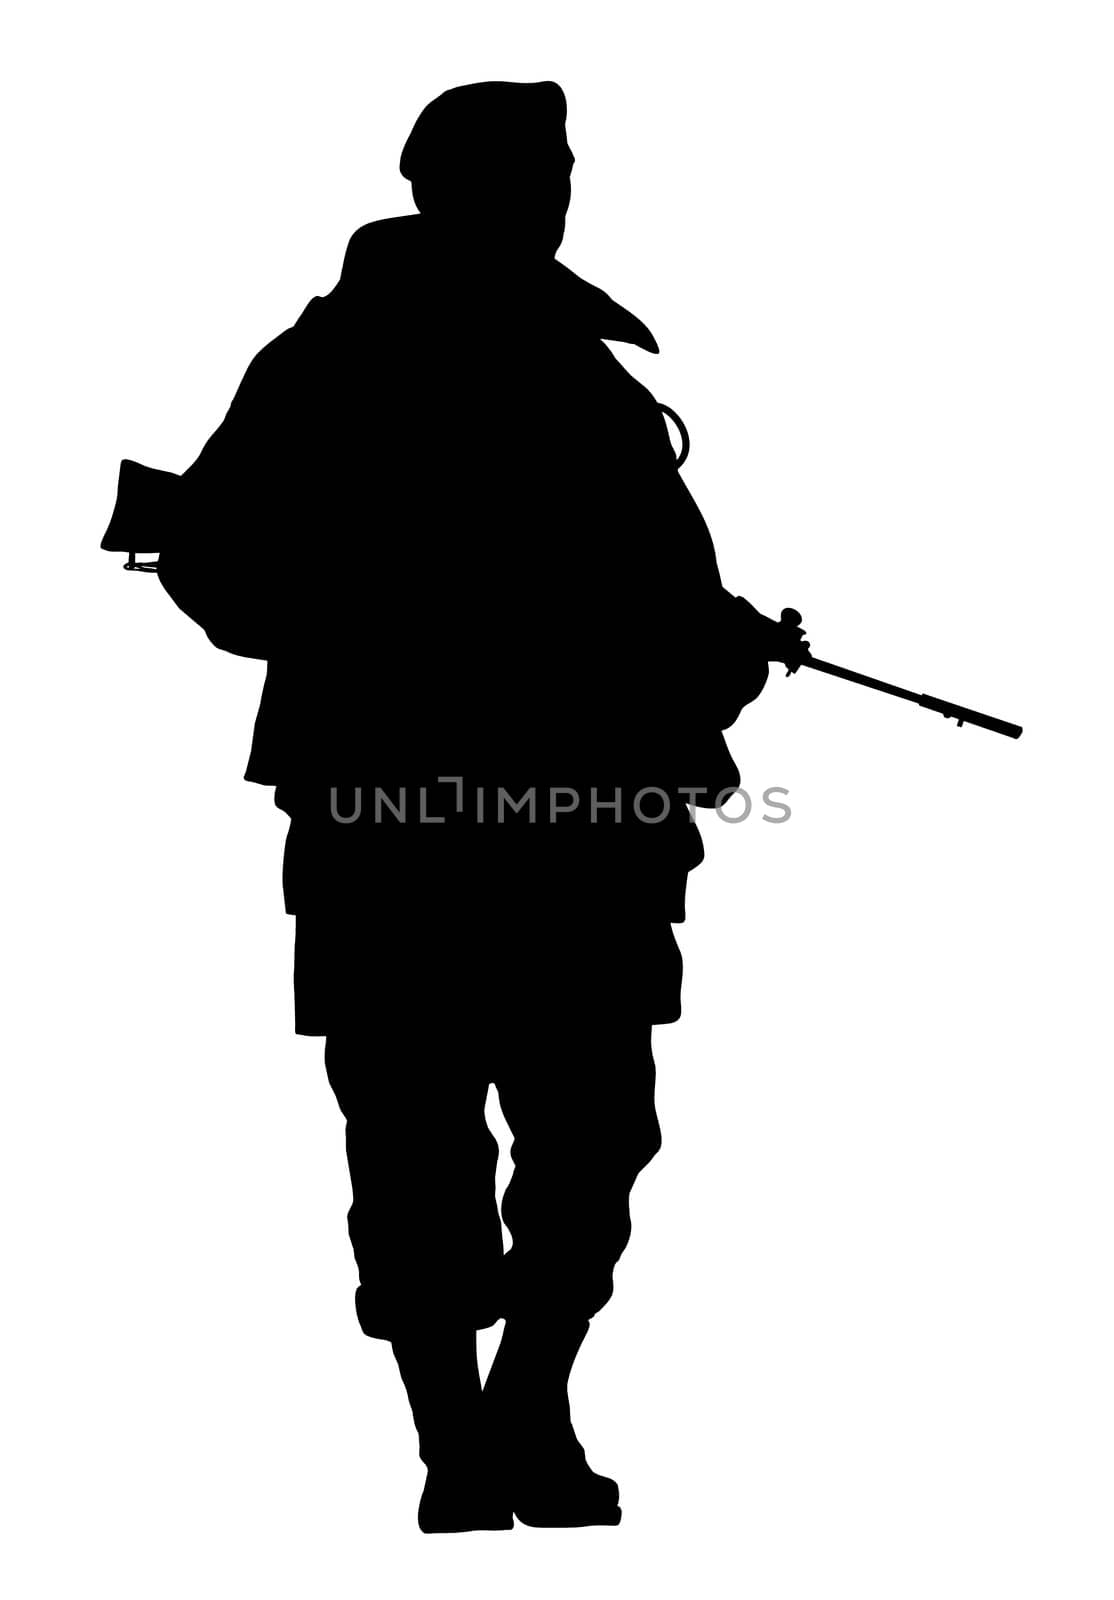 Illustration of a soldier over a white background